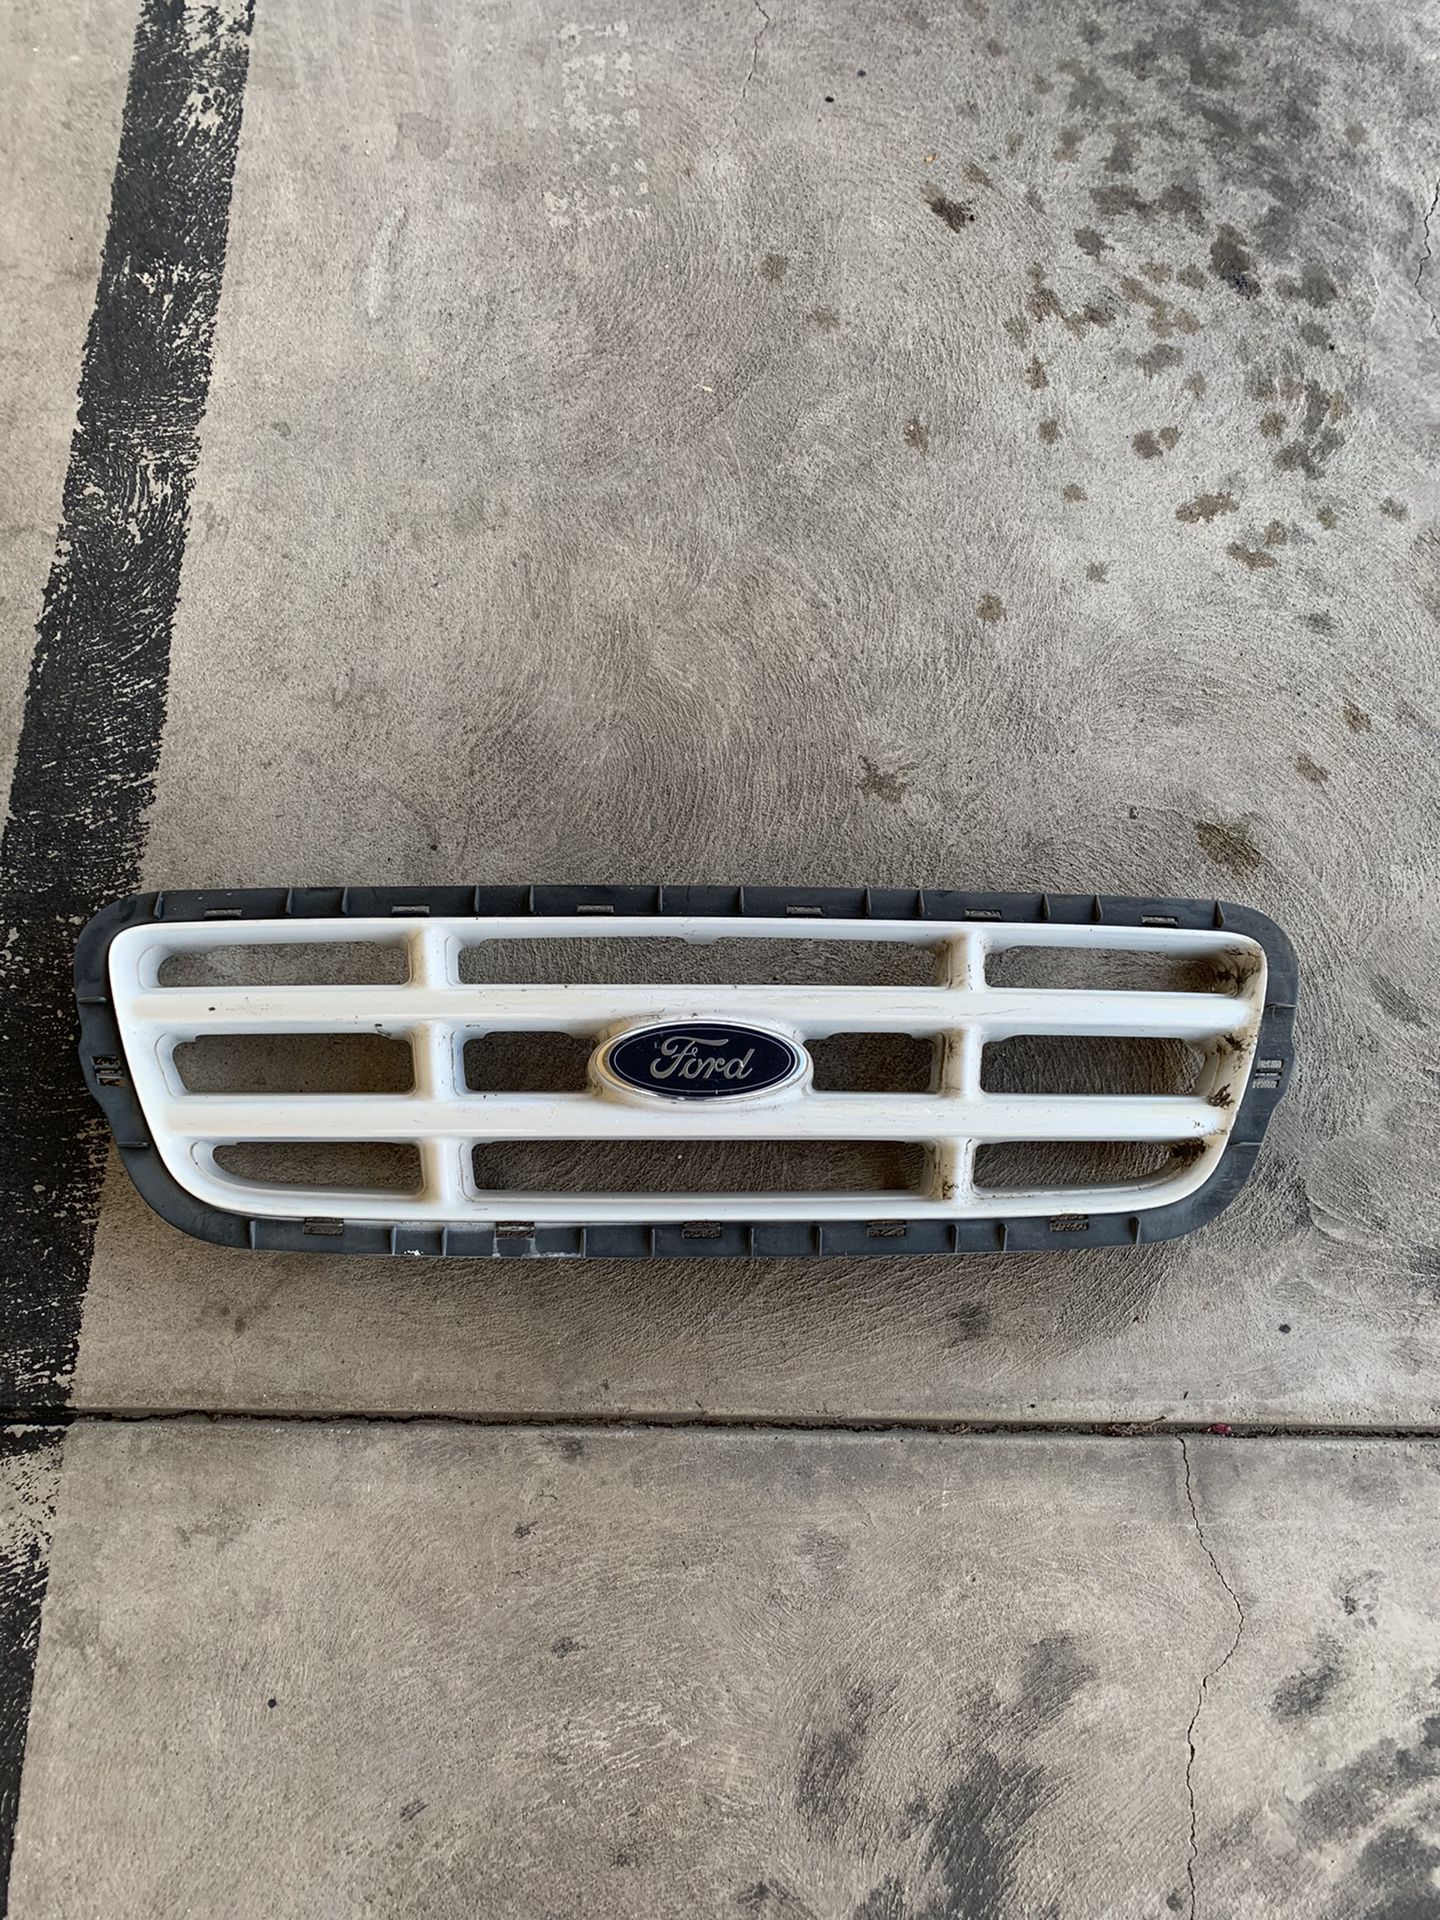 Ford ranger front grill